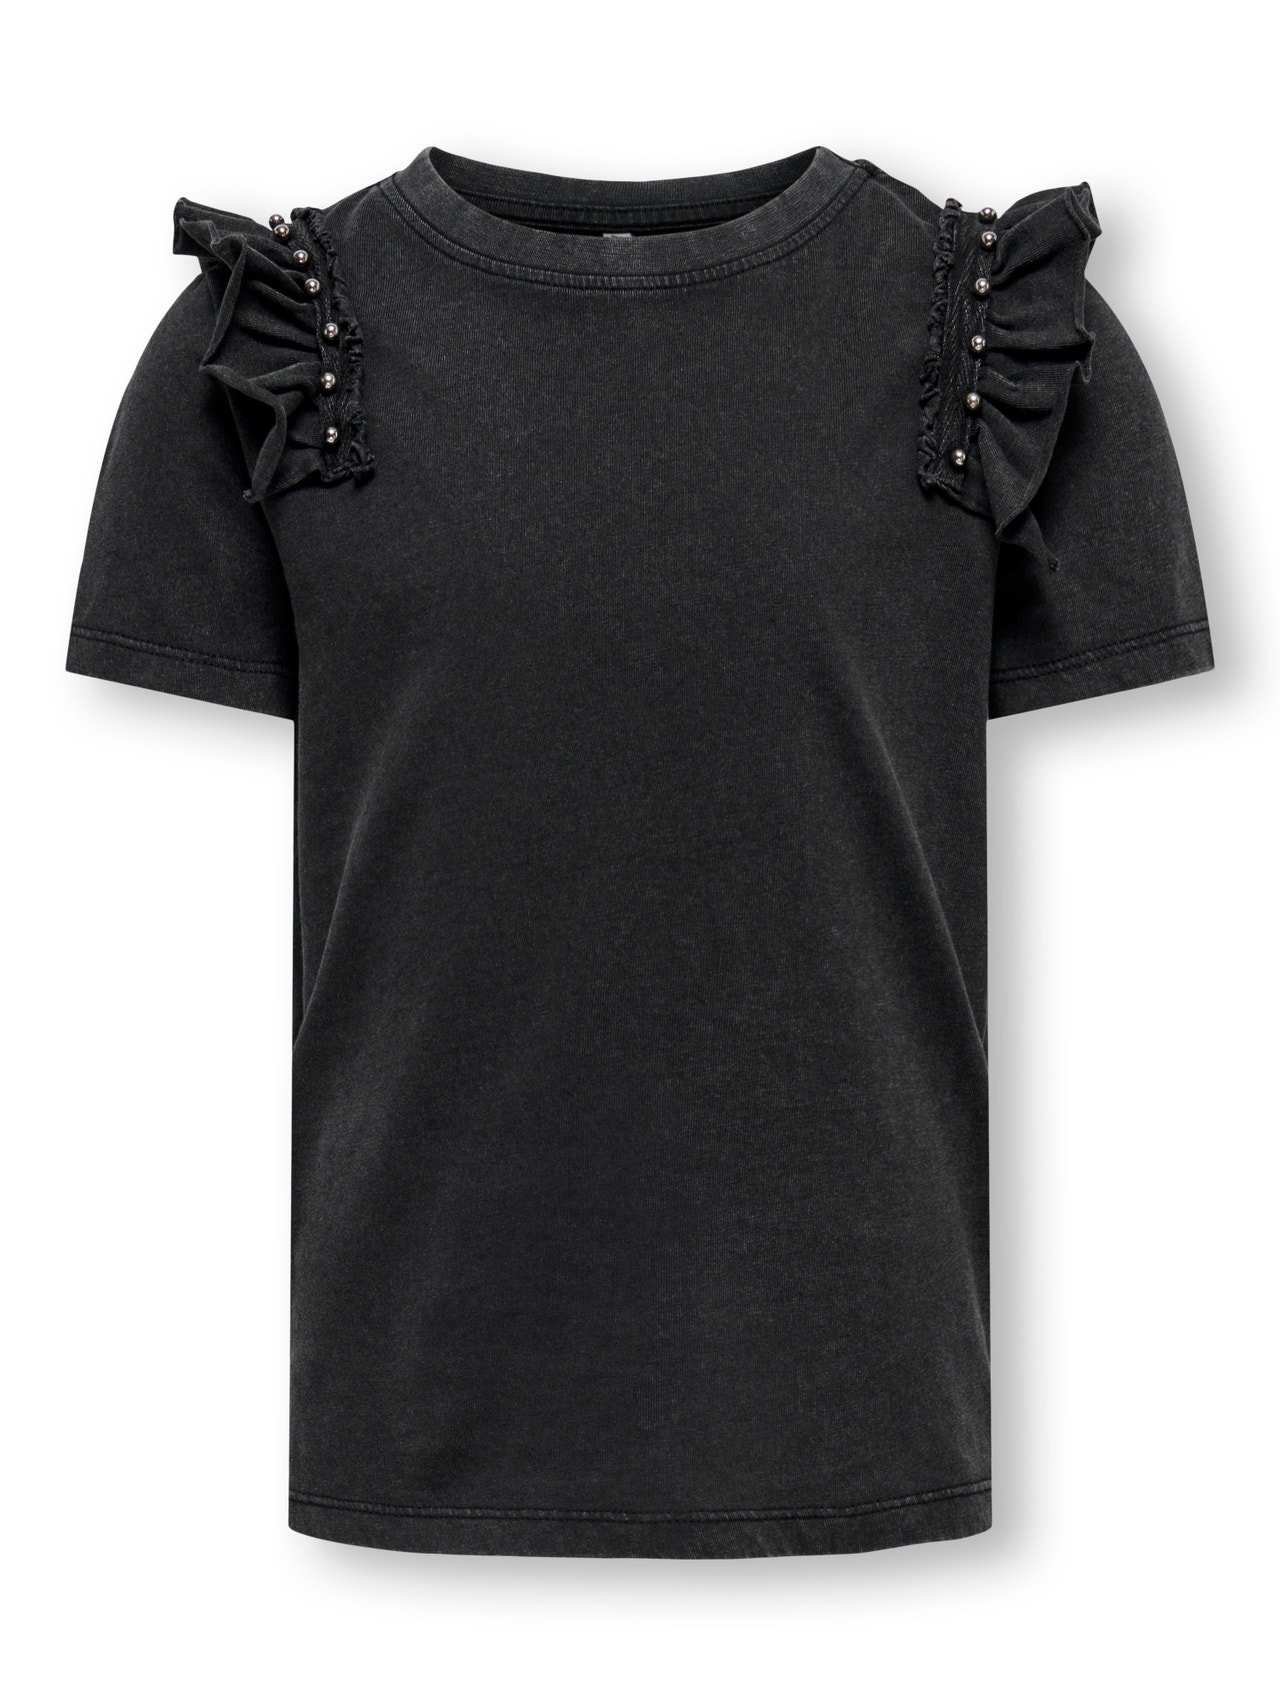 ONLY O-neck t-shirt with frills -Black - 15302938